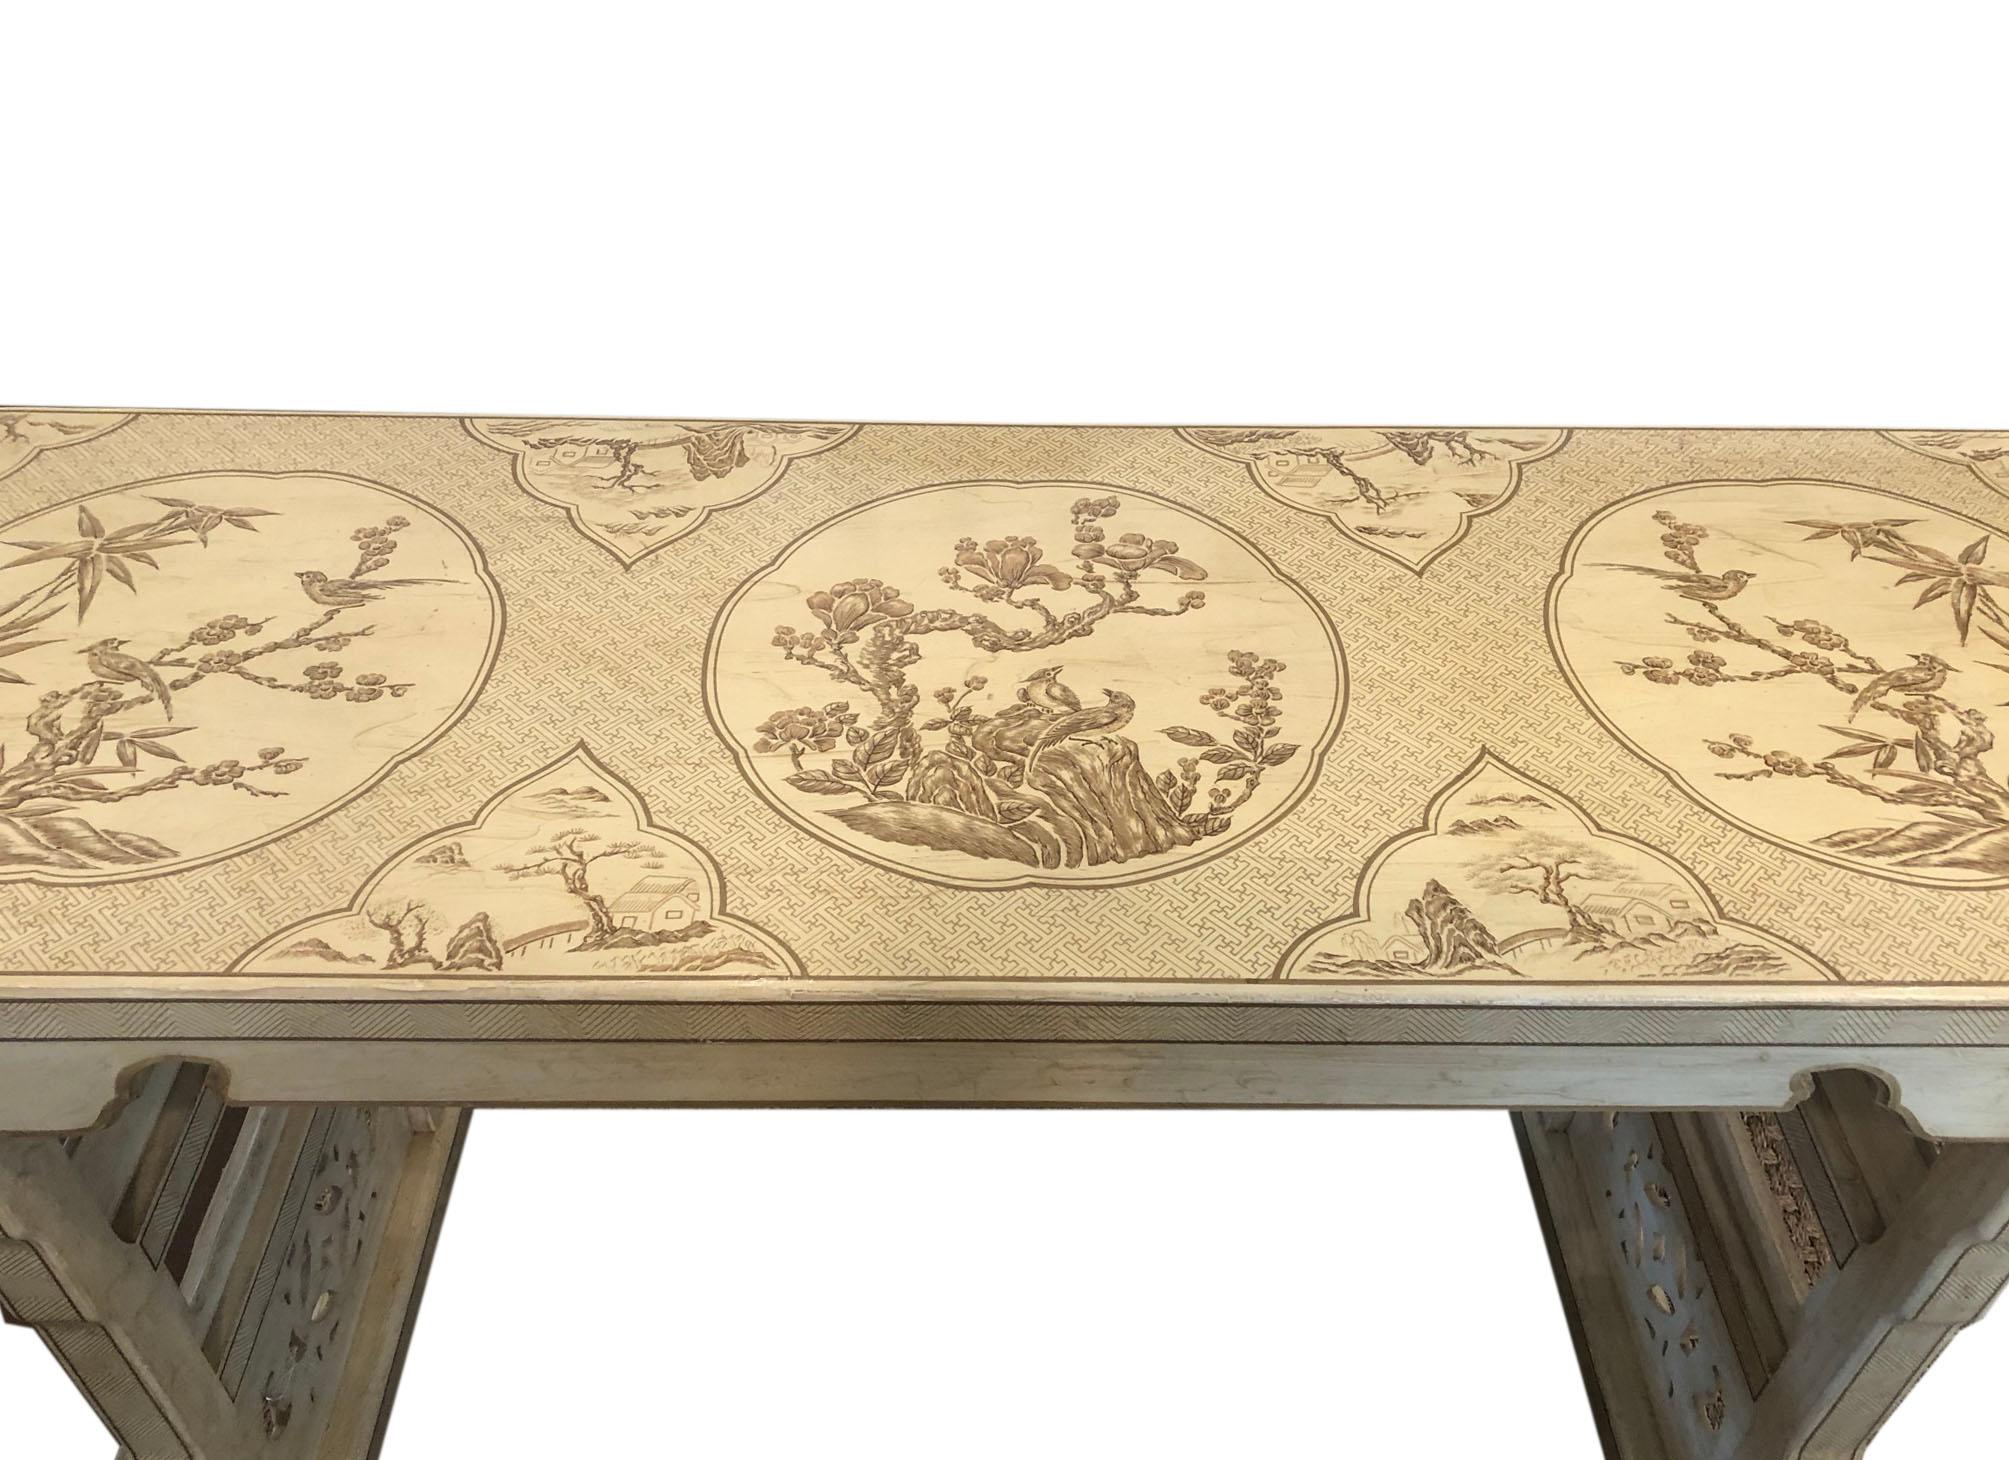 Drexel heritage chinoiserie console table sofa table. Hand painted design of birds and flowers. Drexel Ming Treasures in excellent condition, 1980s. The table is 70